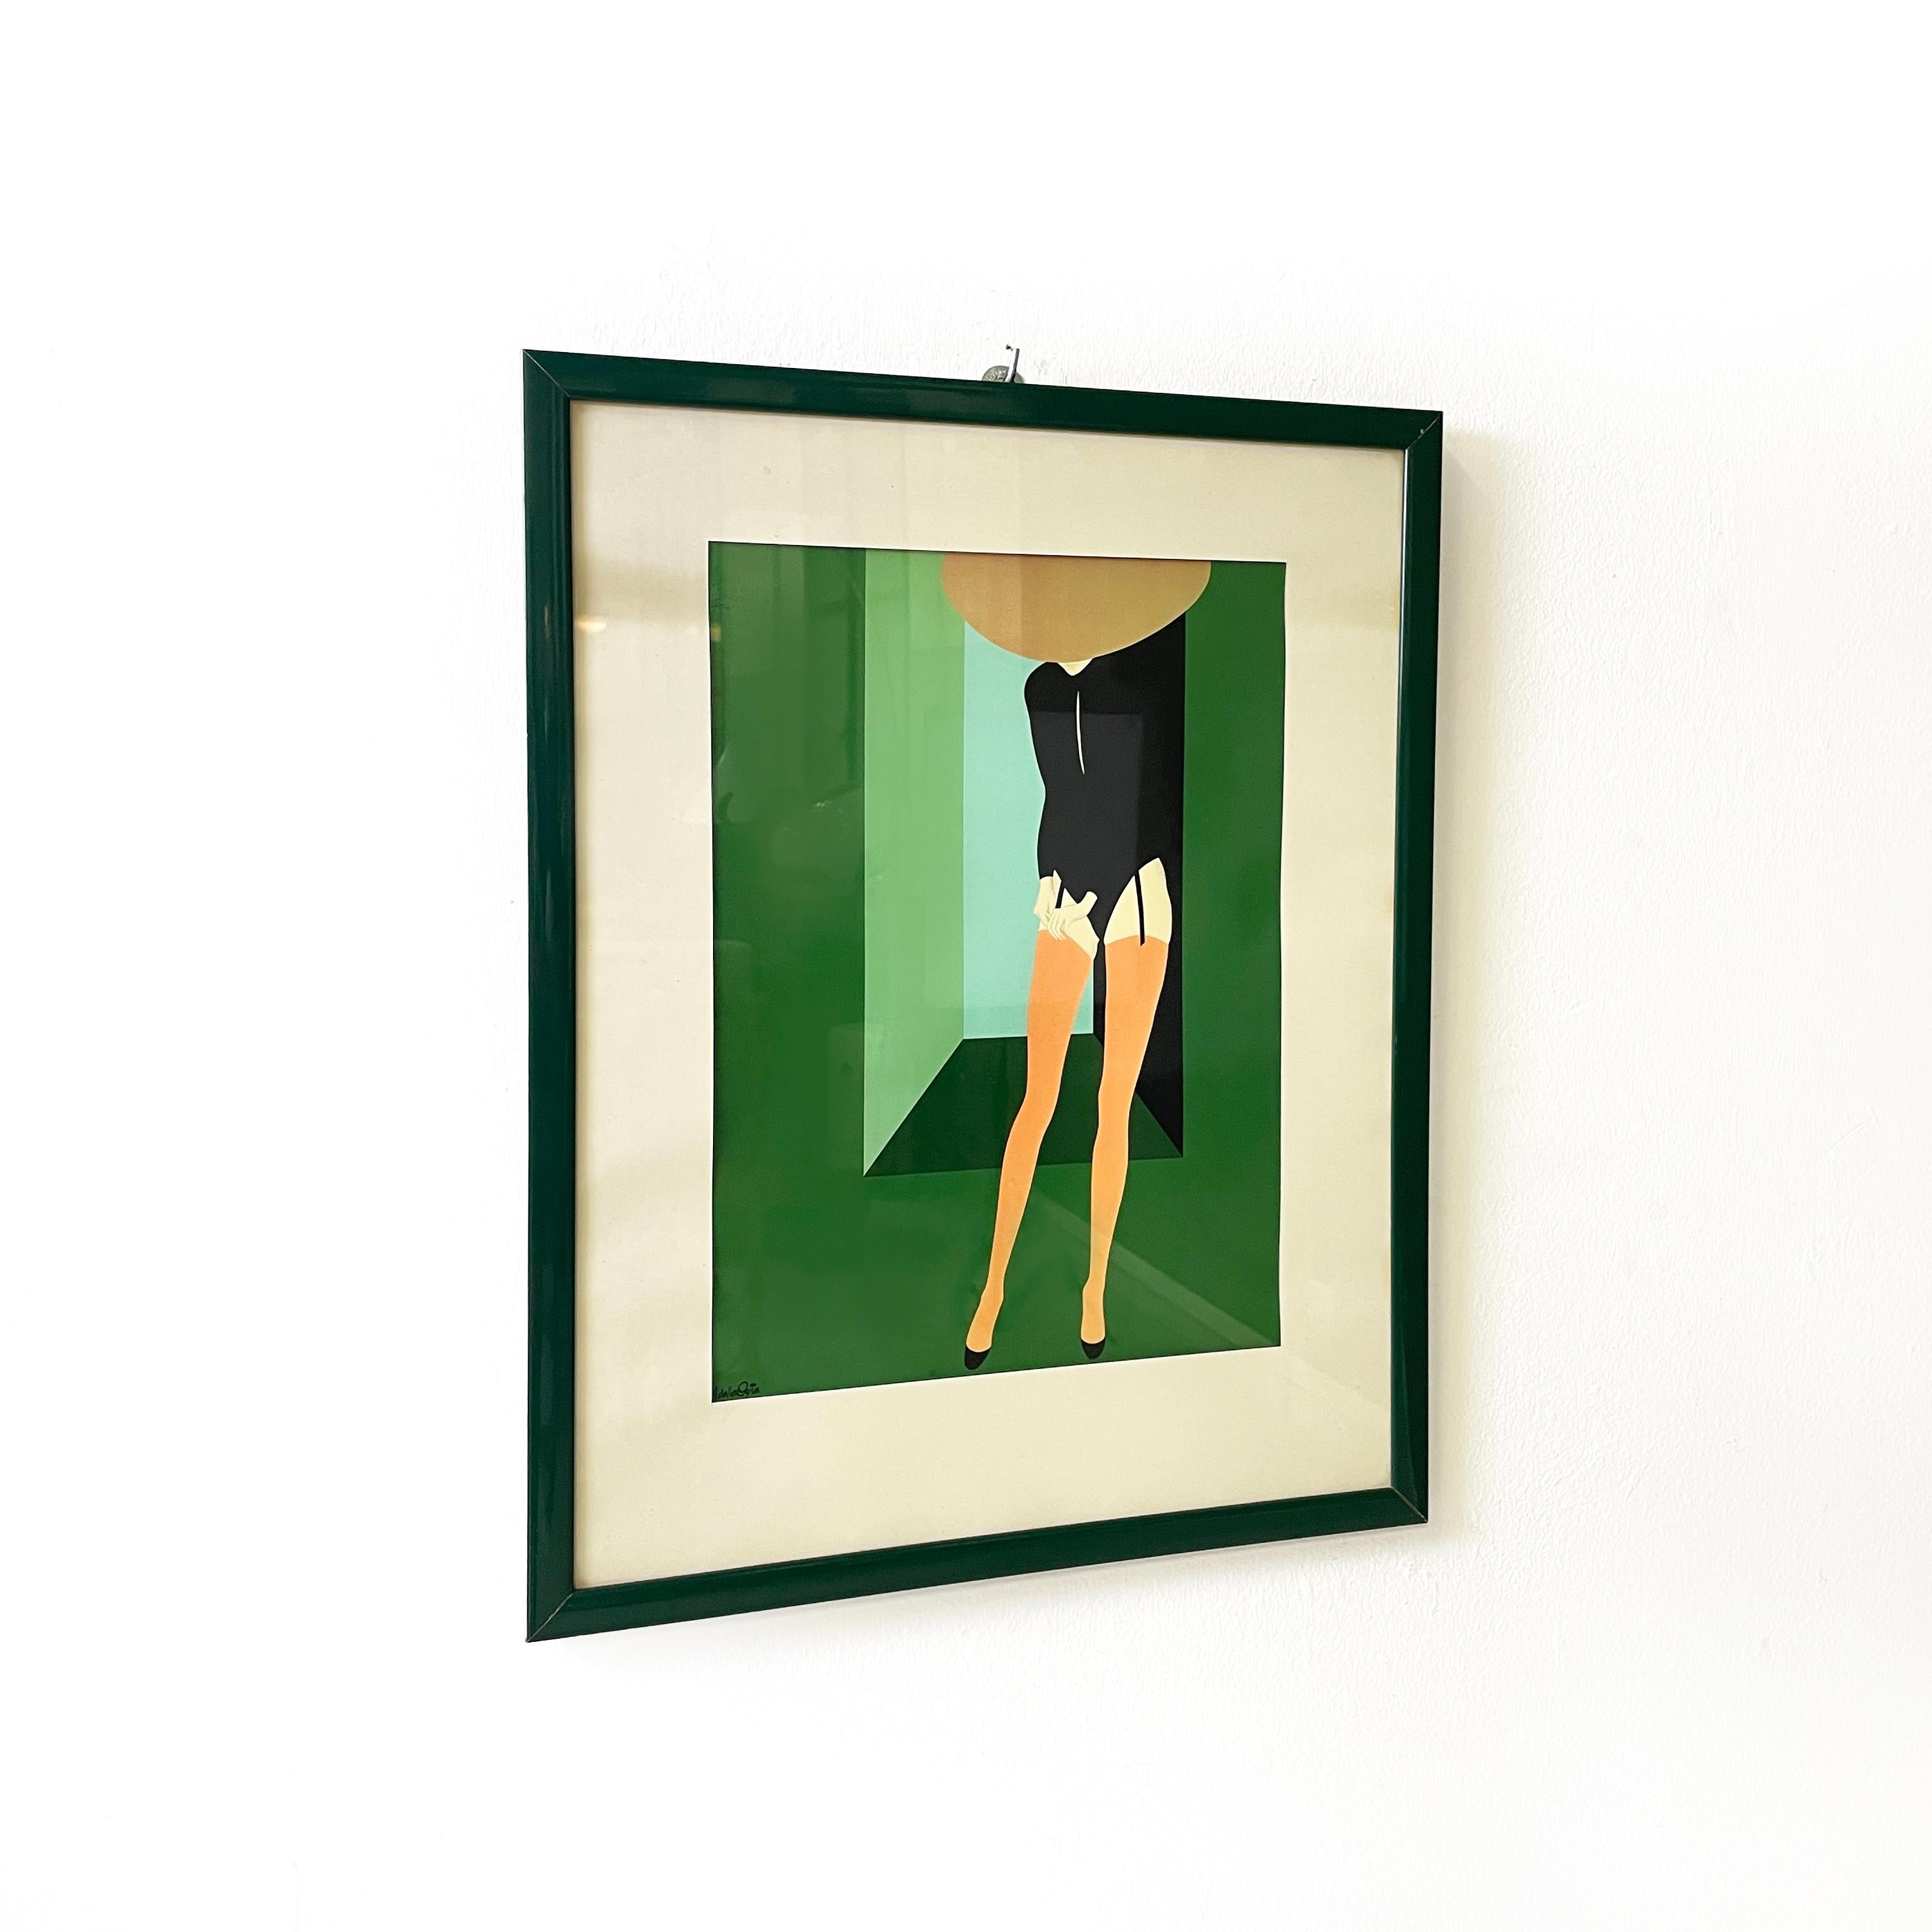 Italian modern Silkscreen print Red Stockings by Amleto Dalla Costa, 1970s
Elegant and fantastic silkscreen print on paper entitled Red Stockings, representing a female figure on a green background. The woman is wearing a black bodysuit, pink-orange